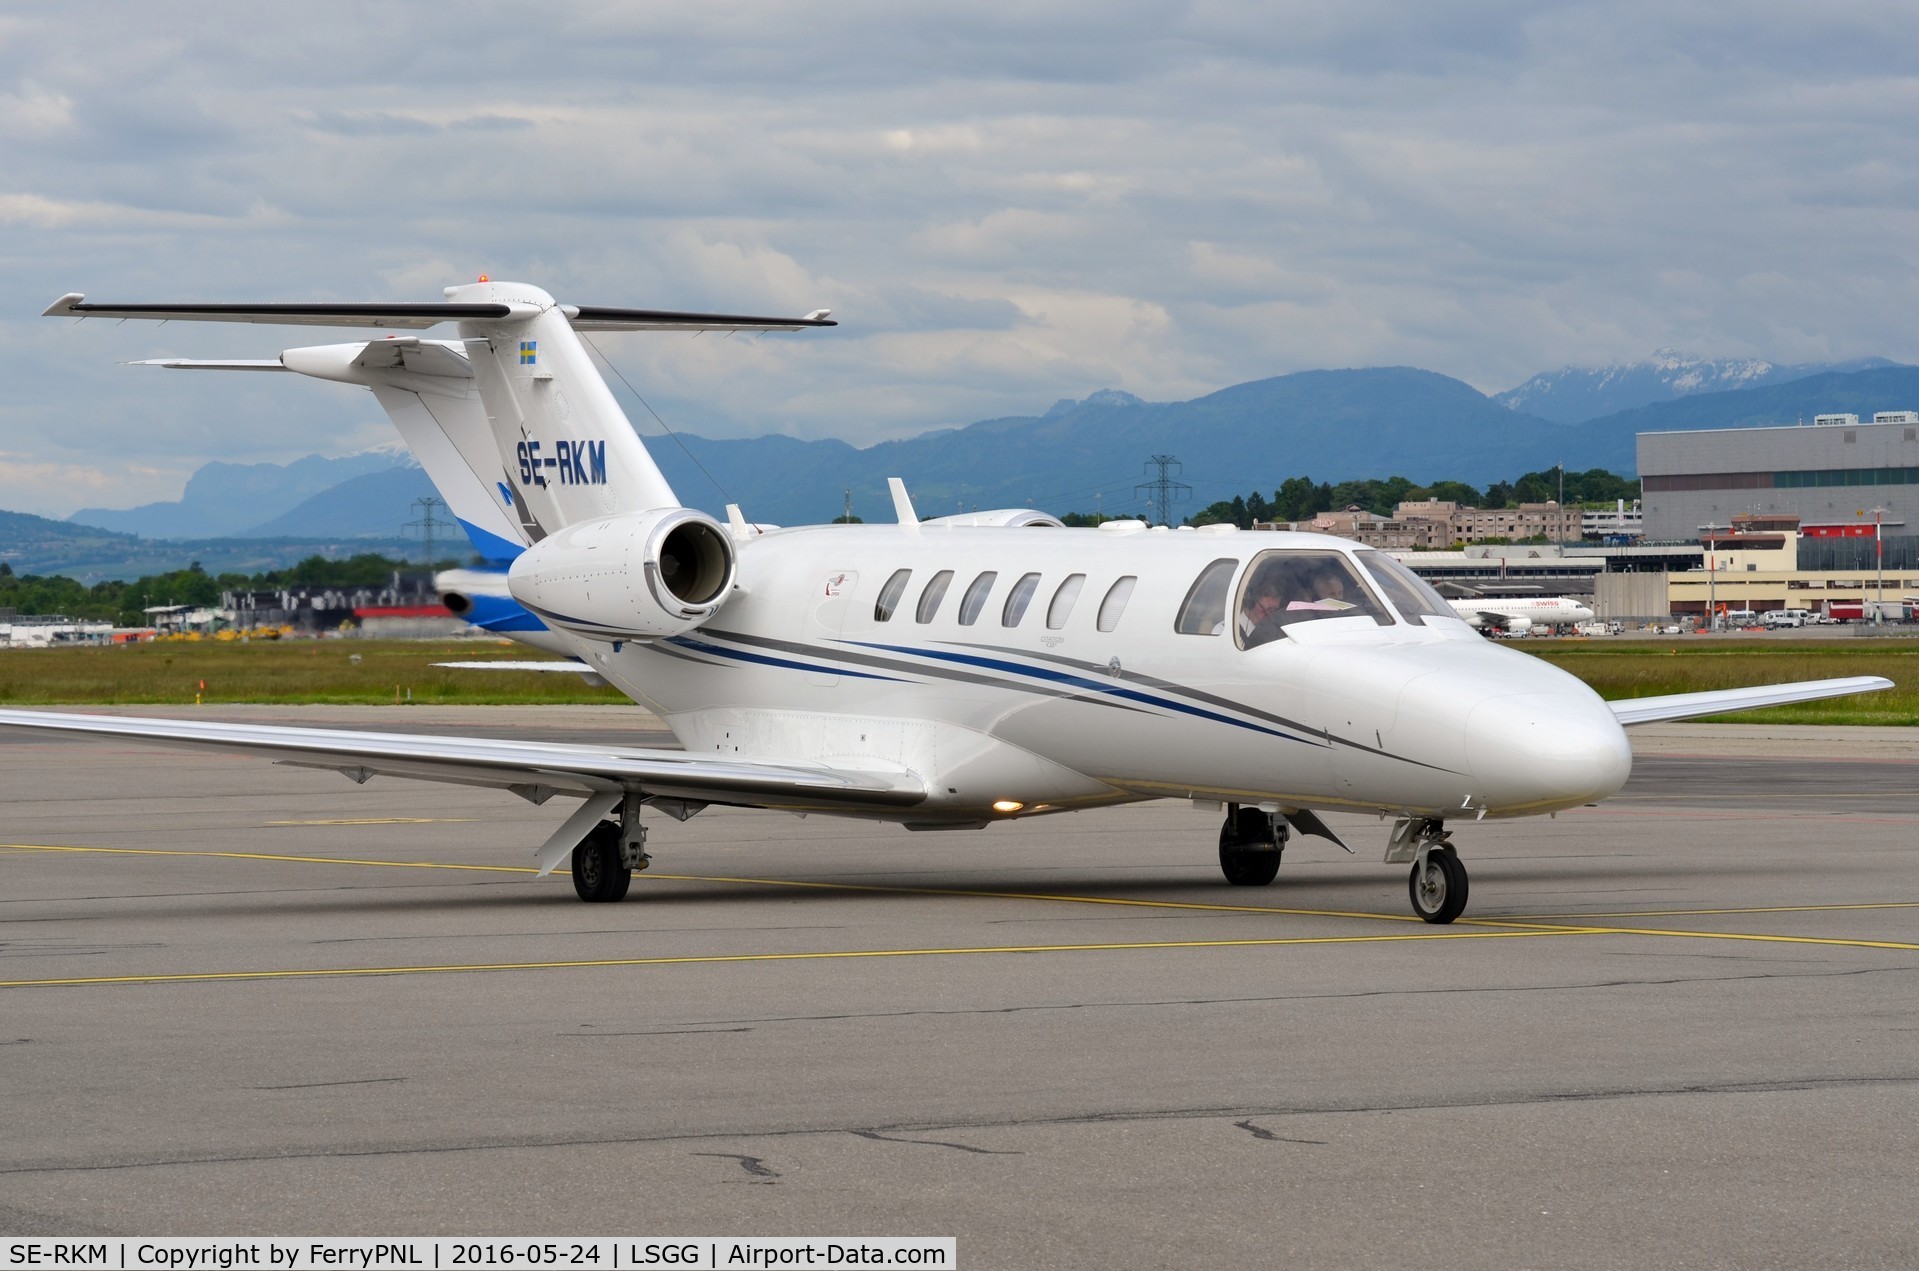 SE-RKM, 2008 Cessna 525A CitationJet CJ2+ C/N 525A-0435, CJ2 taxiing out for departure.